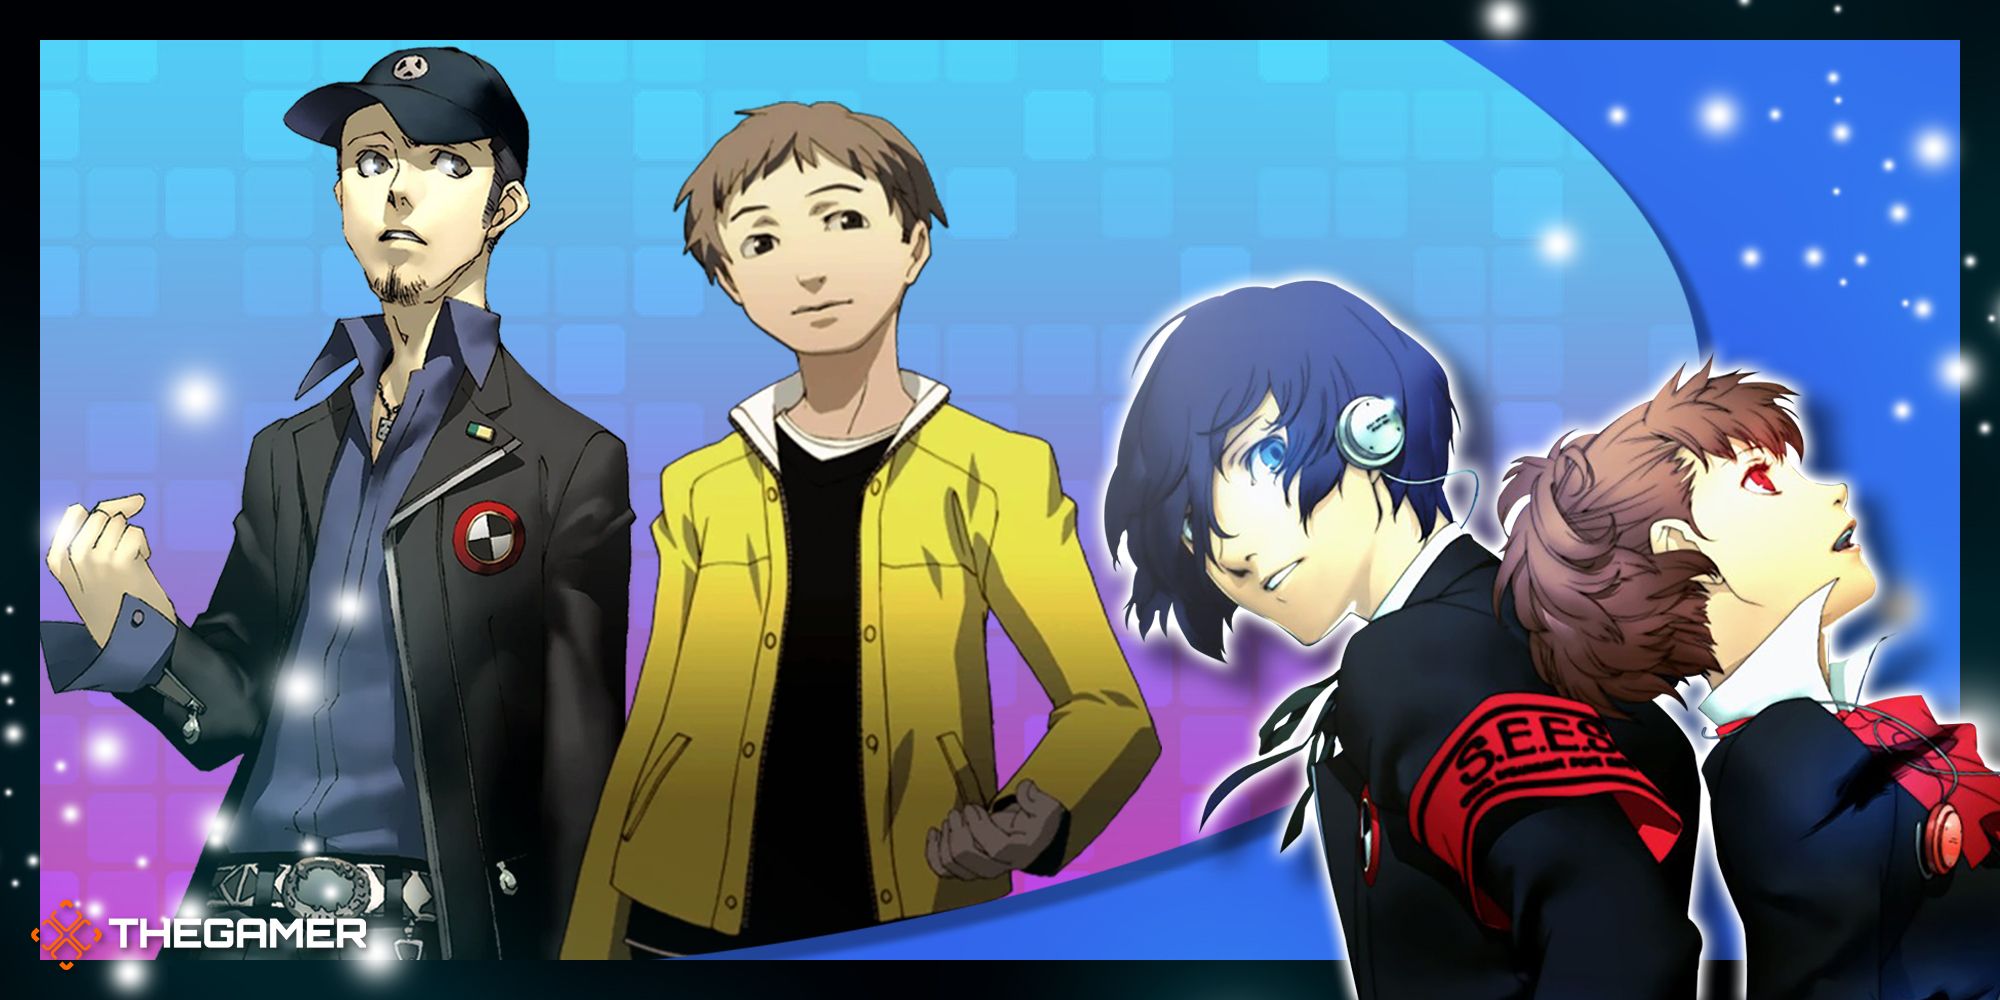 junpei iori and kenji tomochika for the magician social link in our frame for persona 3 portable